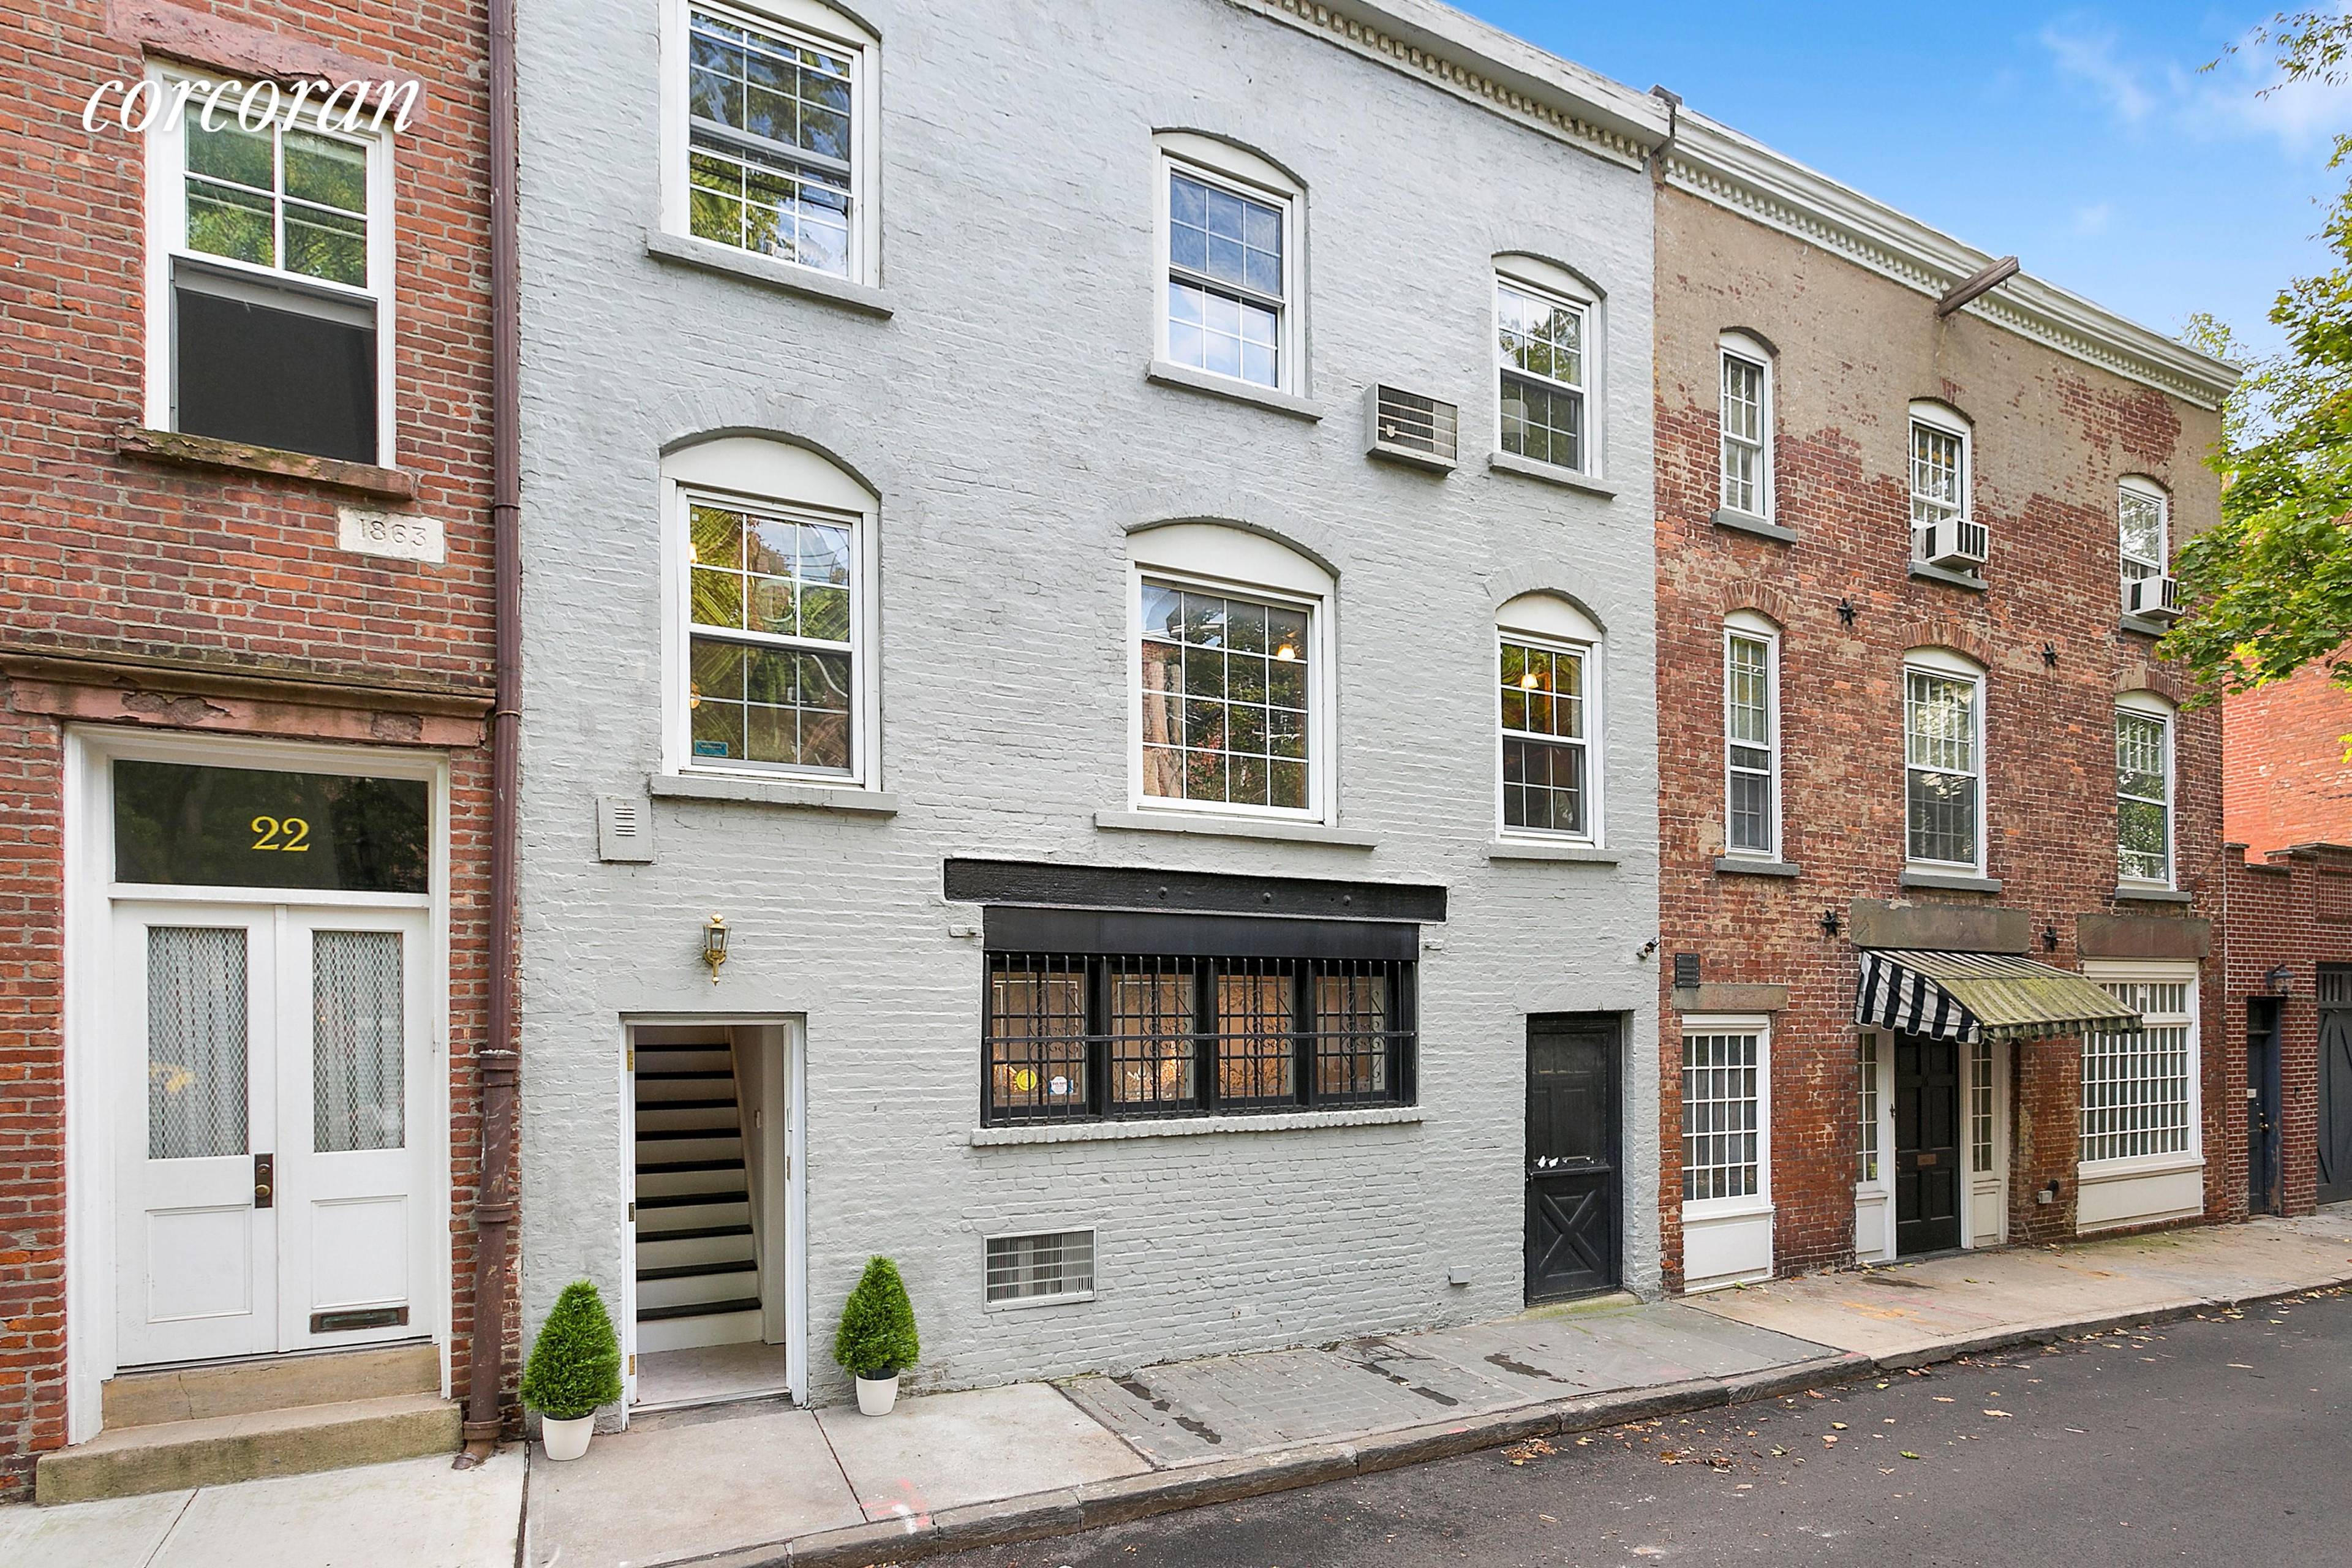 Rarely available and coveted carriage house right on Cobble Hill Park !